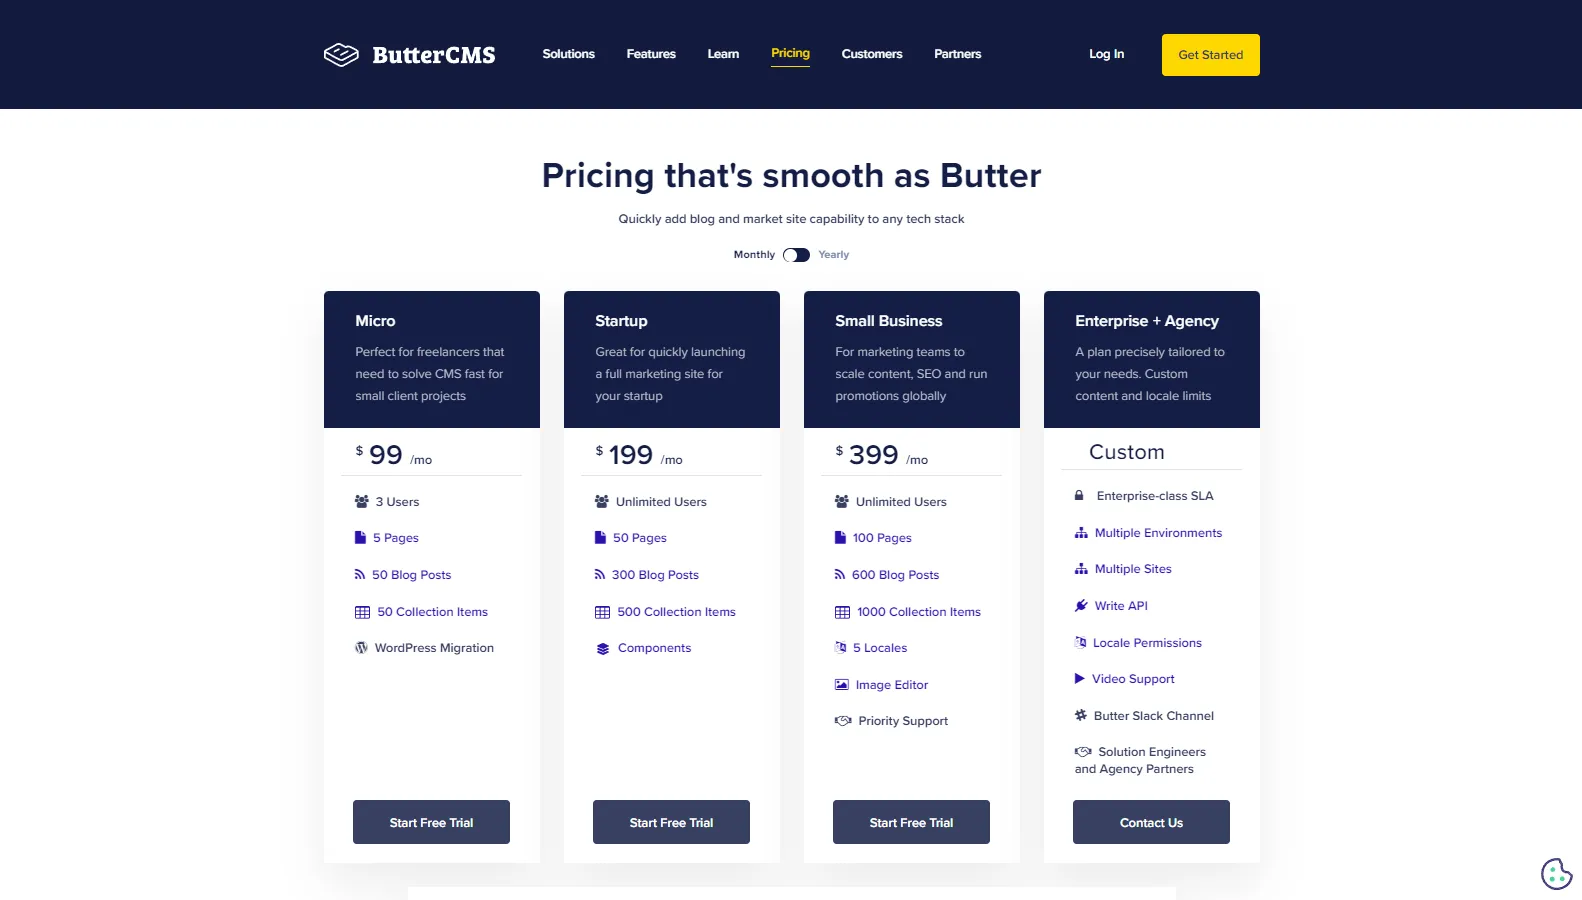 ButterCMS pricing